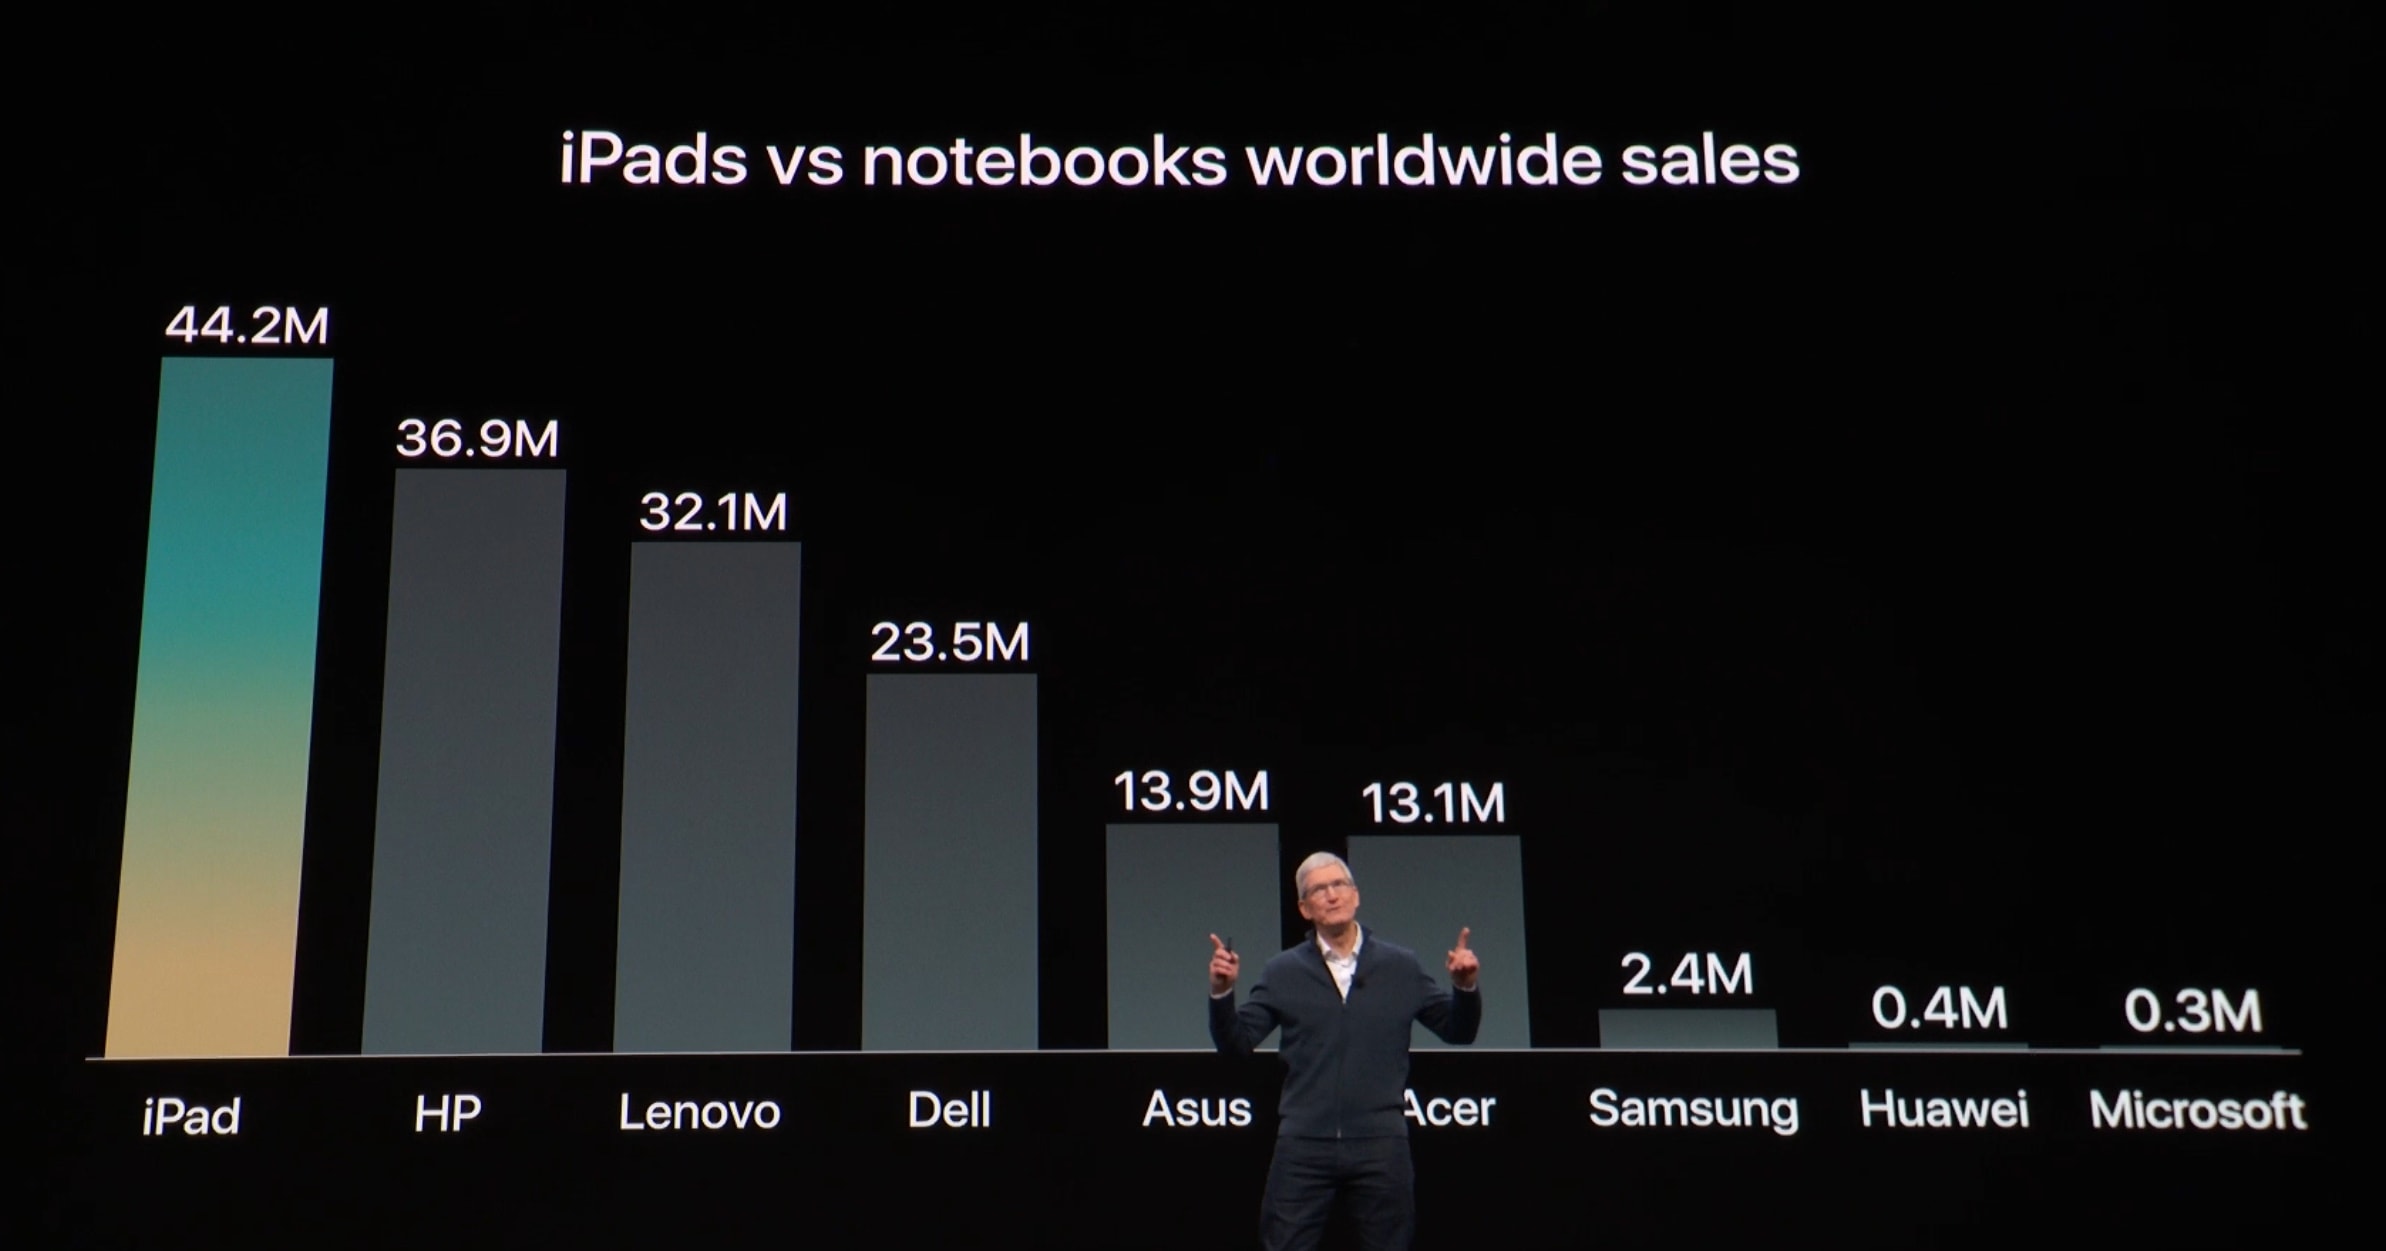 iPad outsells every notebook maker.